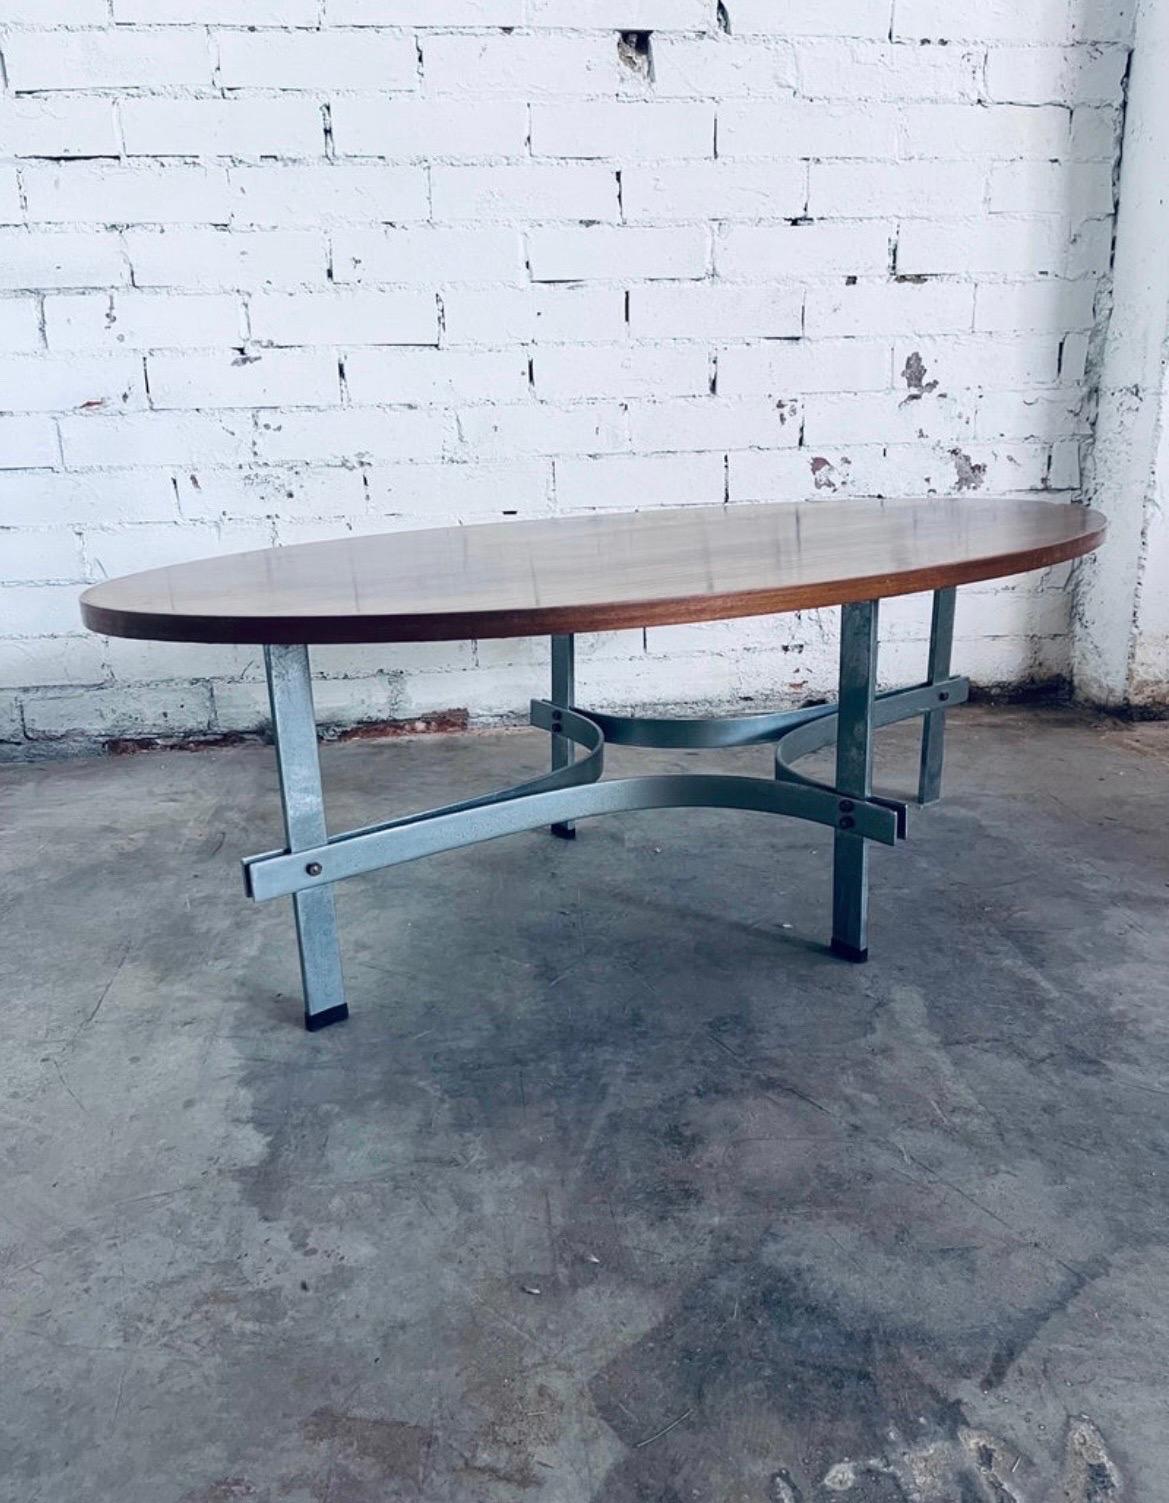 Mid-century Italian coffee or cocktail table designed in the 1950s by Guglielmo Ulrich with an oval solid wood top and metal legs. 

Its elegant proportions and the combination of metal and bent steel are reminiscent of the designs of Carlo Graffi